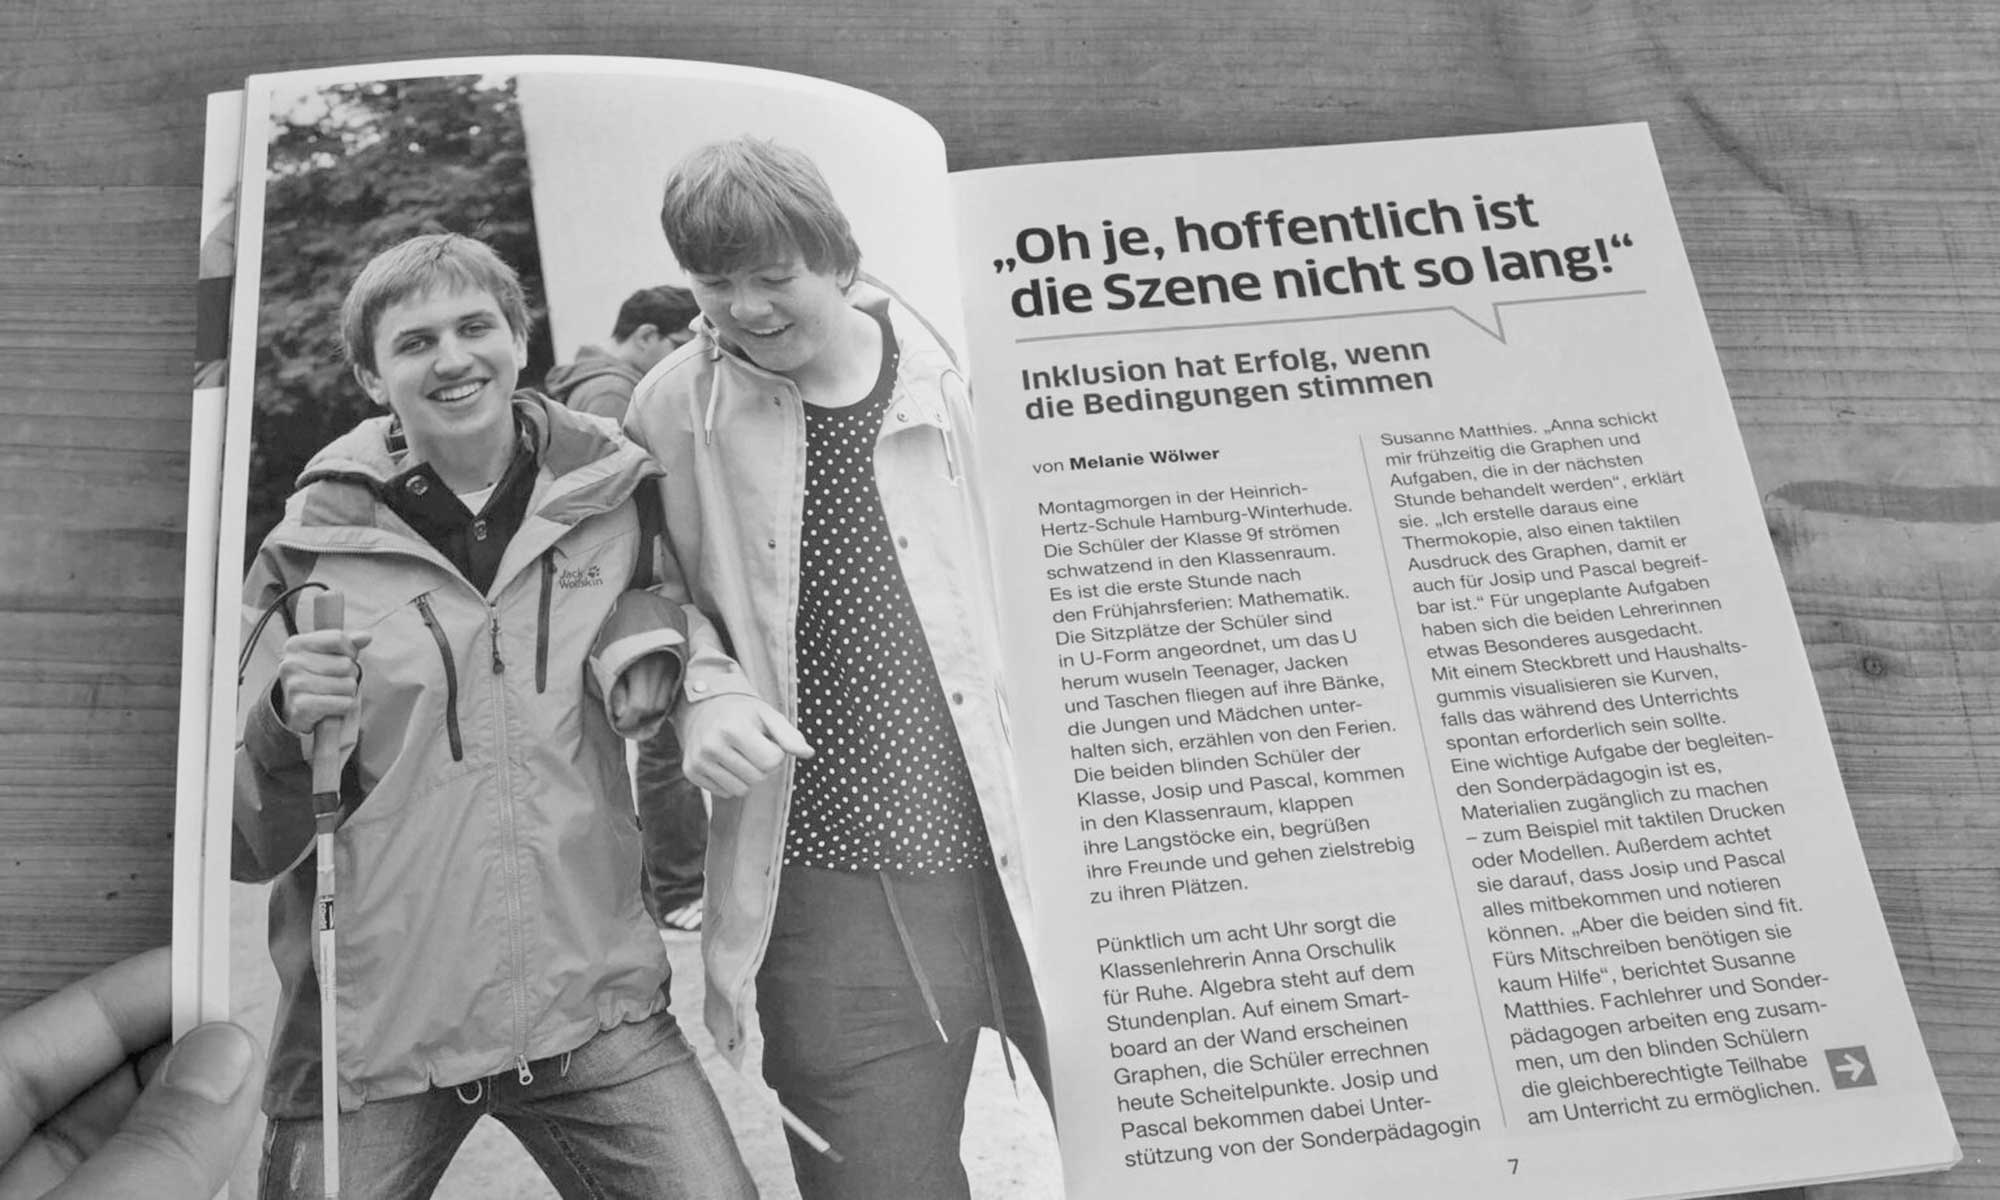 Photo for the next project: Deutscher Blinden- und Sehbehindertenverband DBSV e.V. View of the double-page spread of an article on inclusion at school. On the left, a photo of a happy-go-lucky blind teenager squabbling with a sighted classmate; on the right, a report on her everyday life at school.